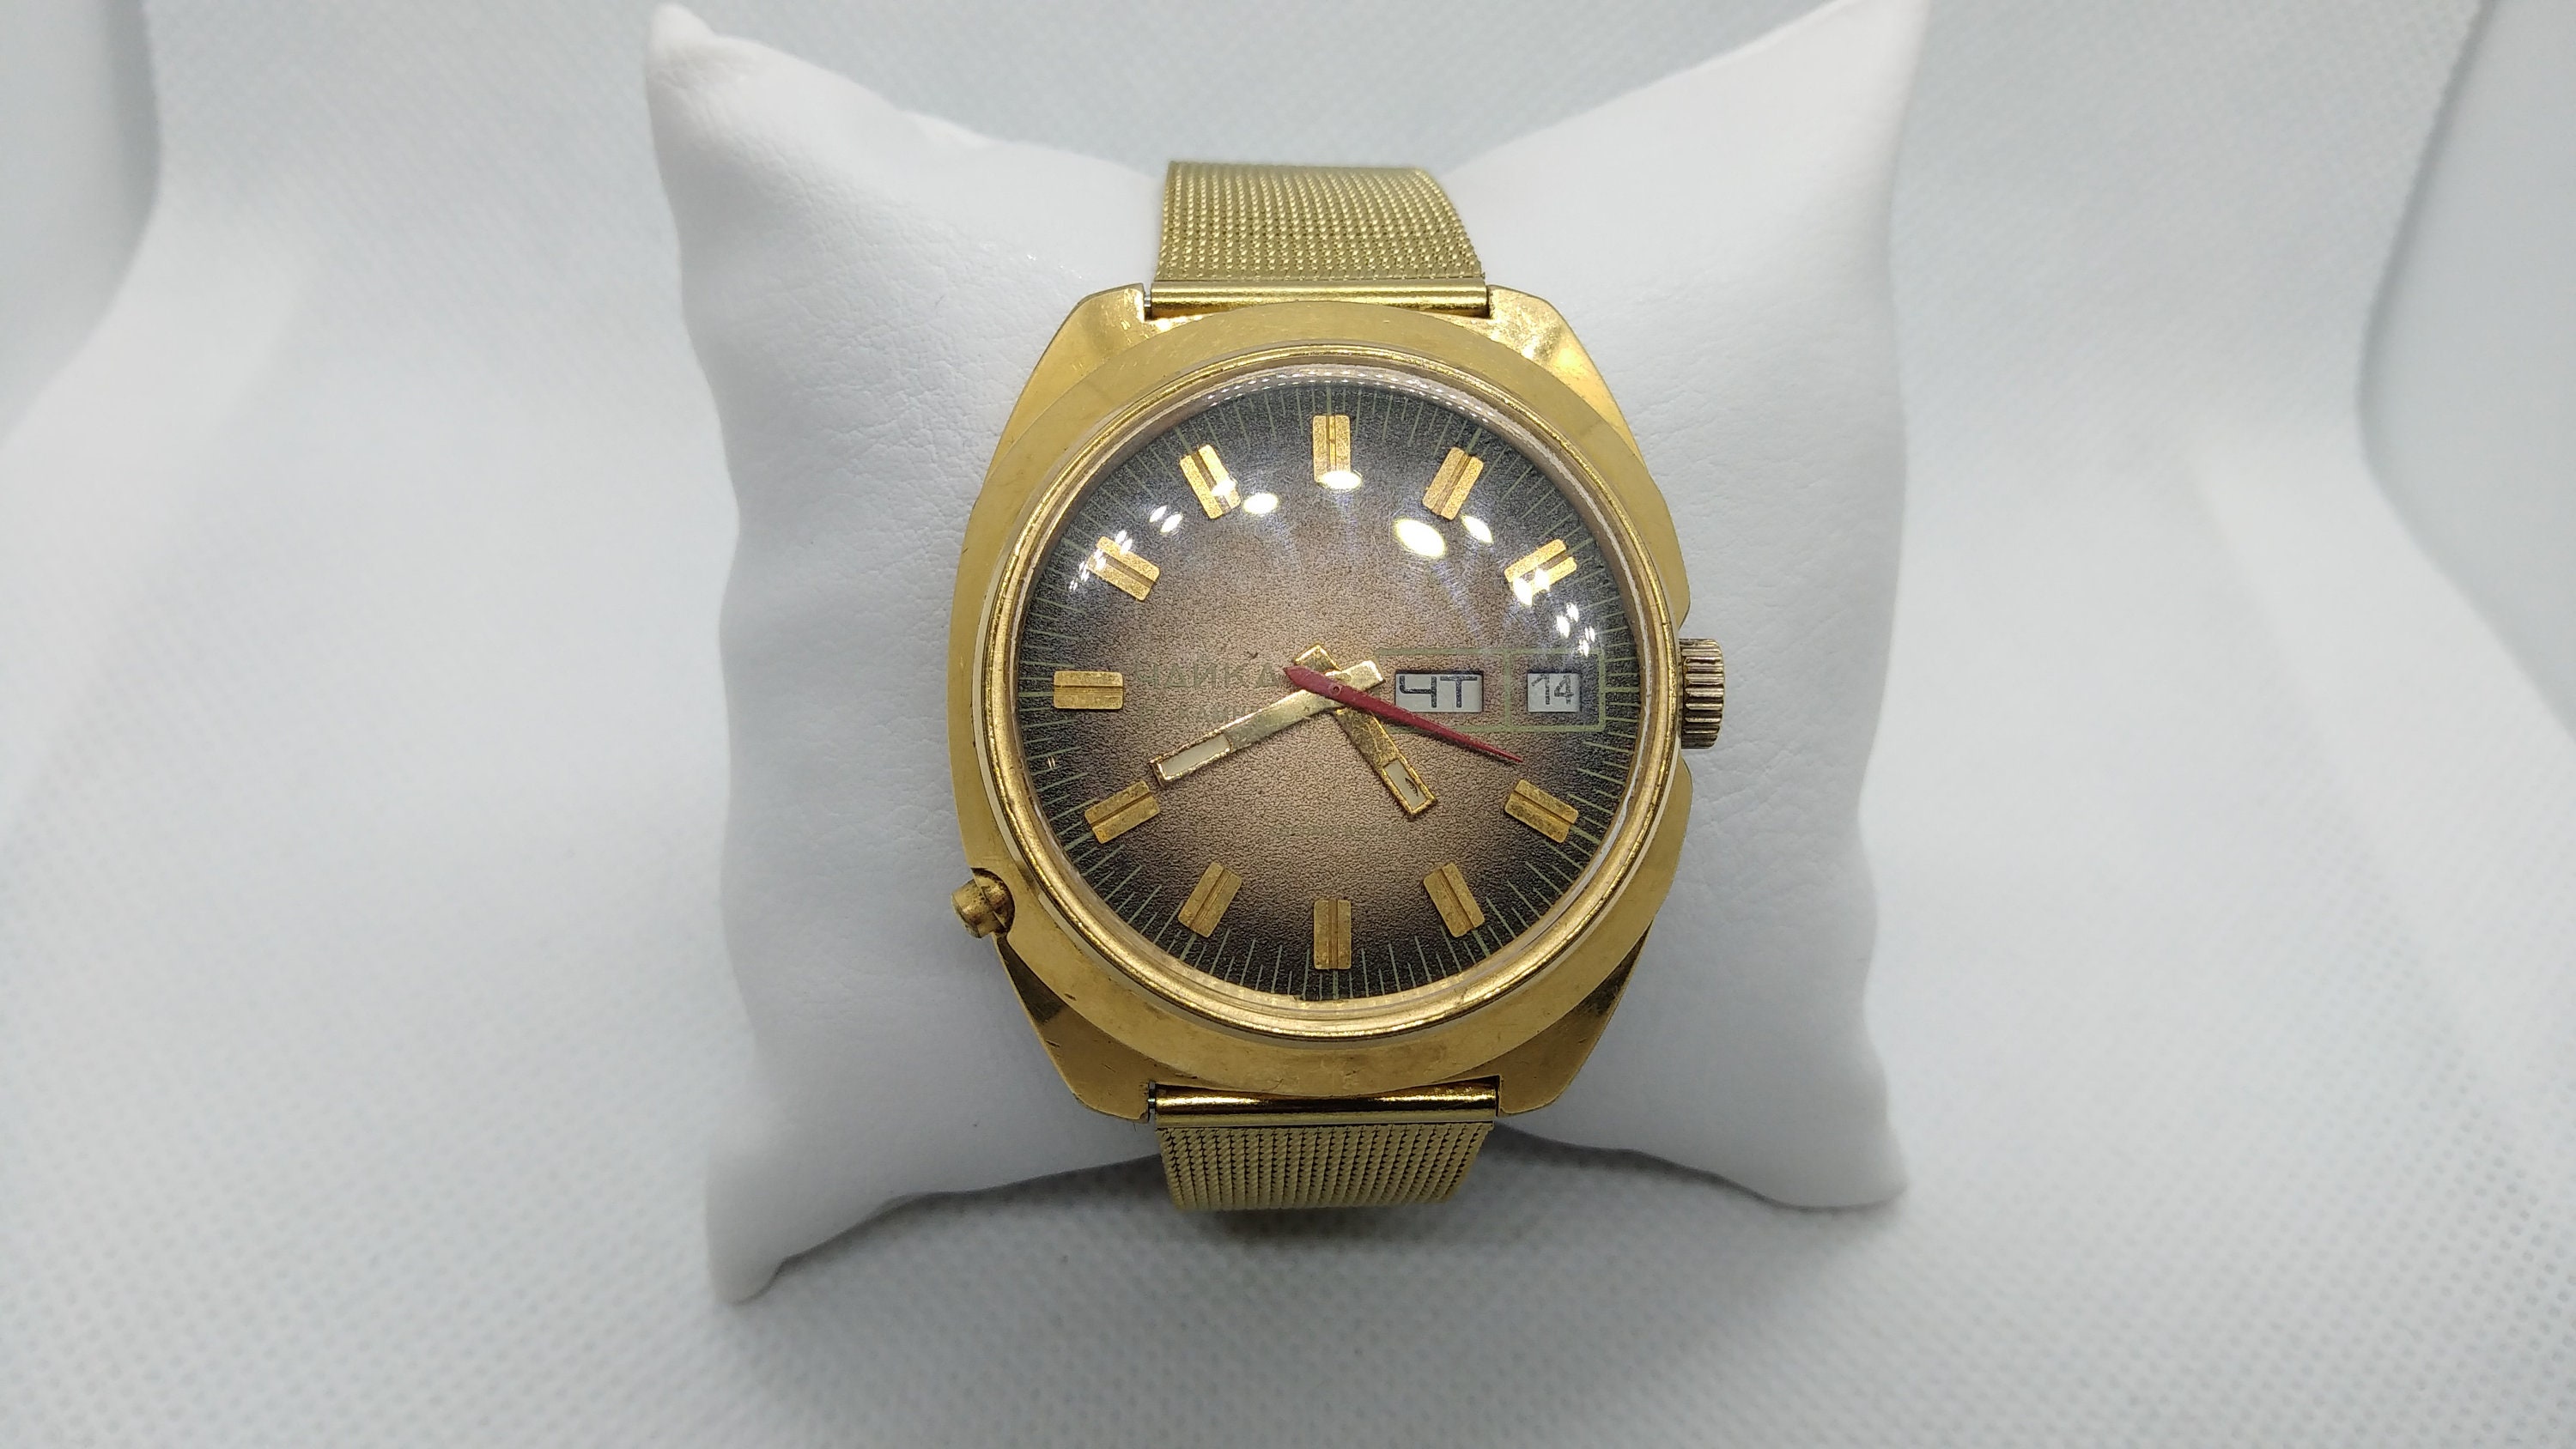 Vintage Watch Chajka Soviet Watch Gold Plated Case Made in - Etsy